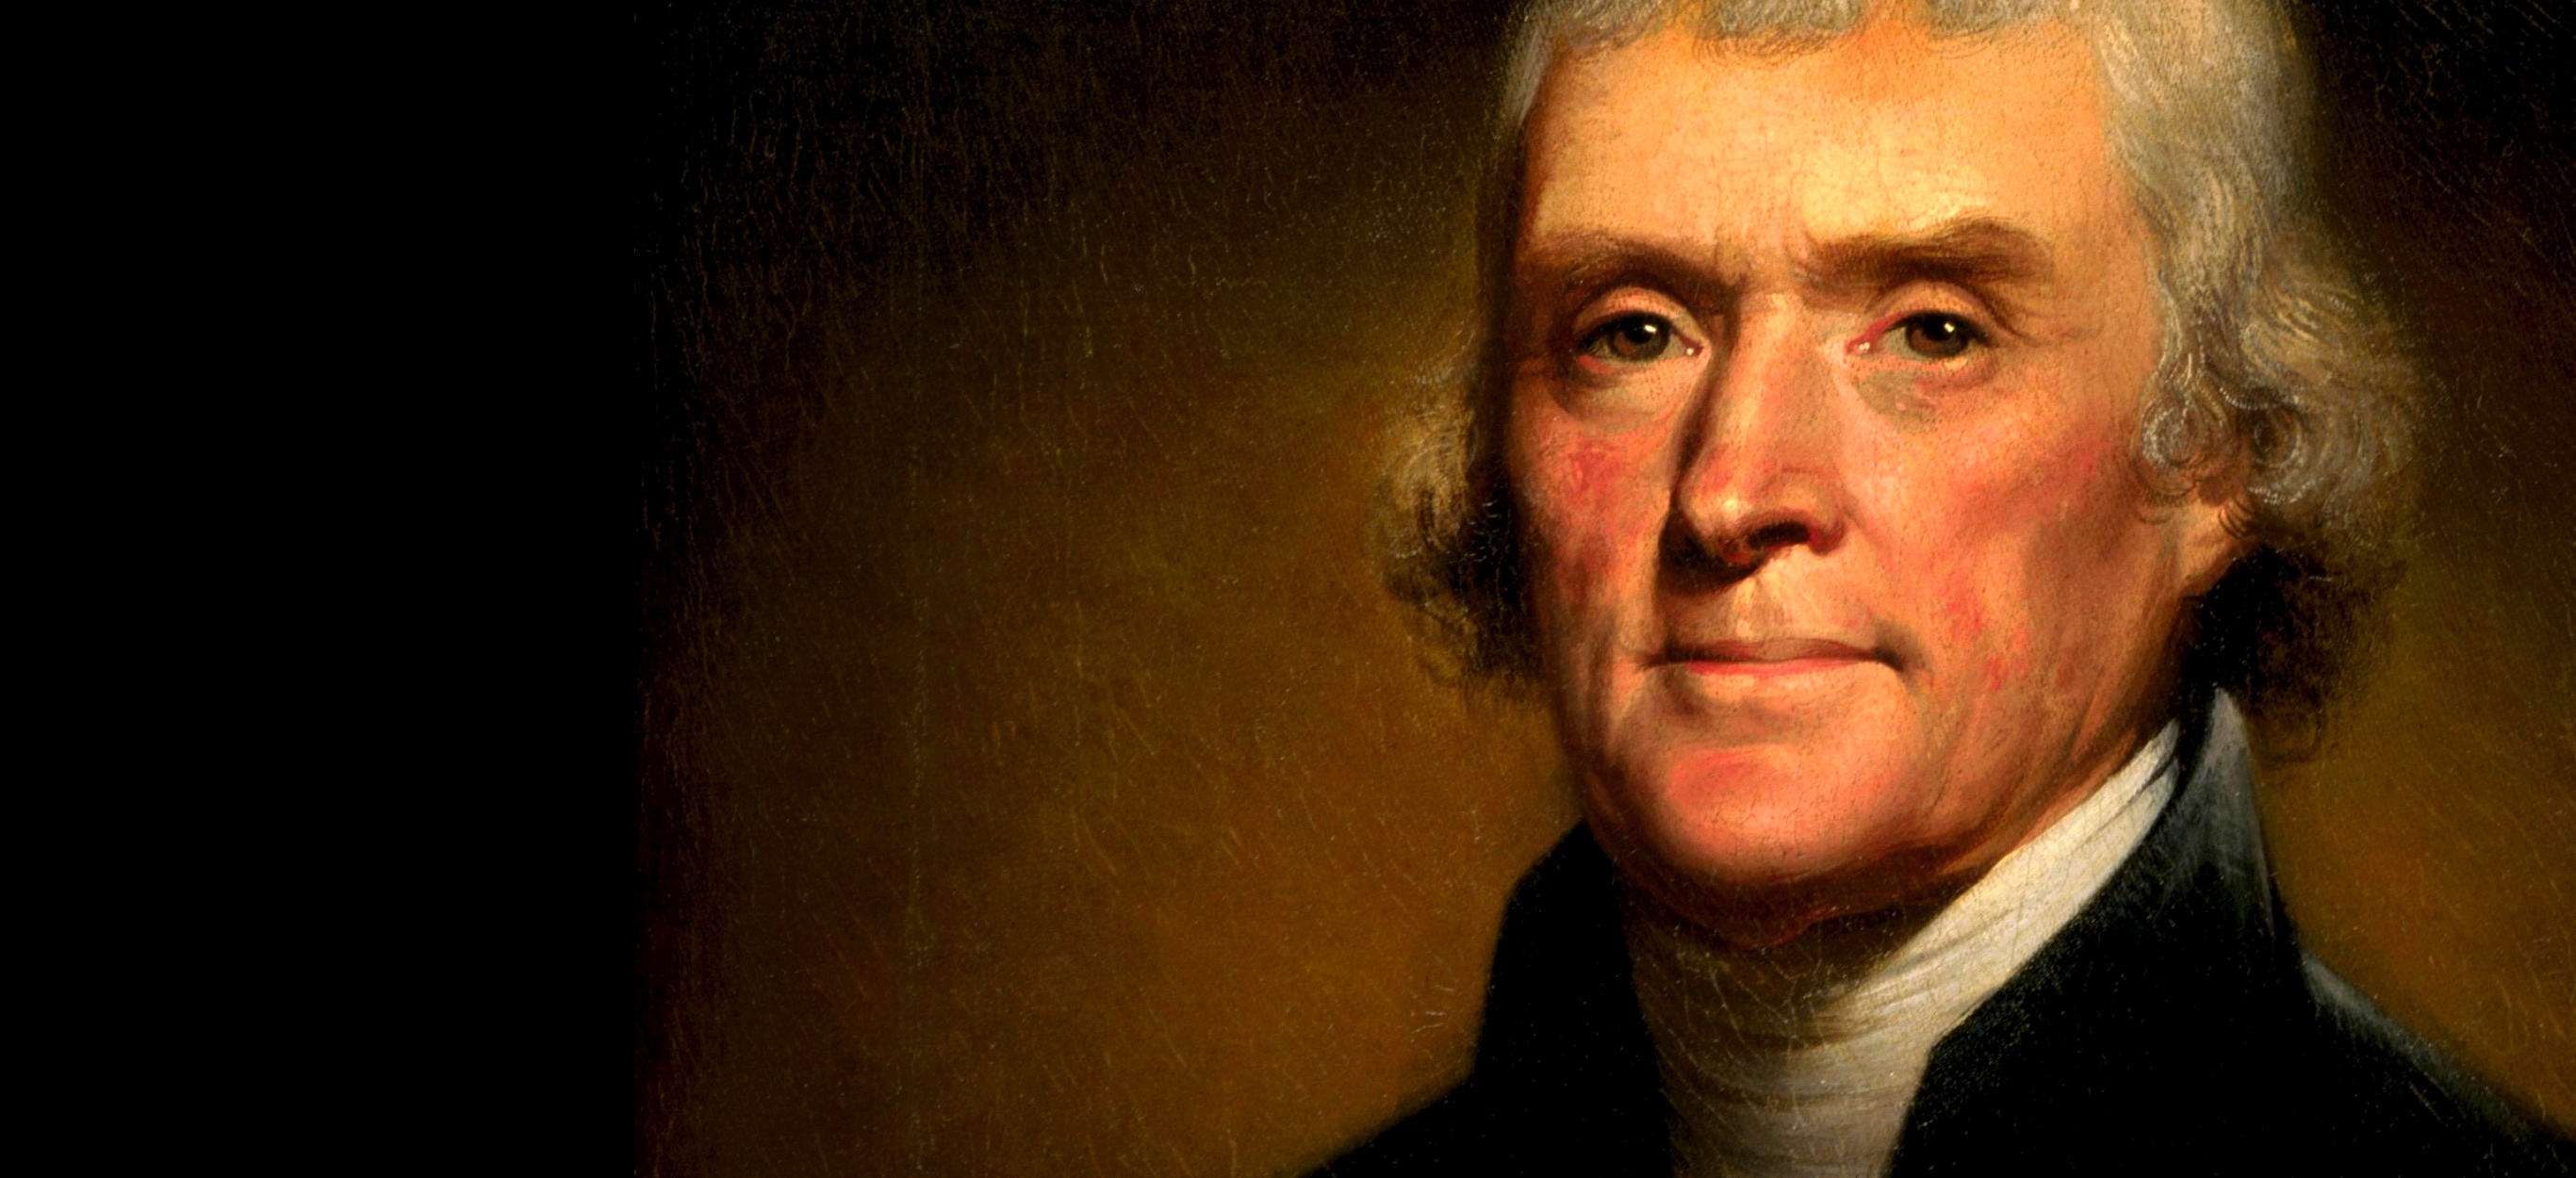 President of university founded by Jefferson asked to not quote Jefferson